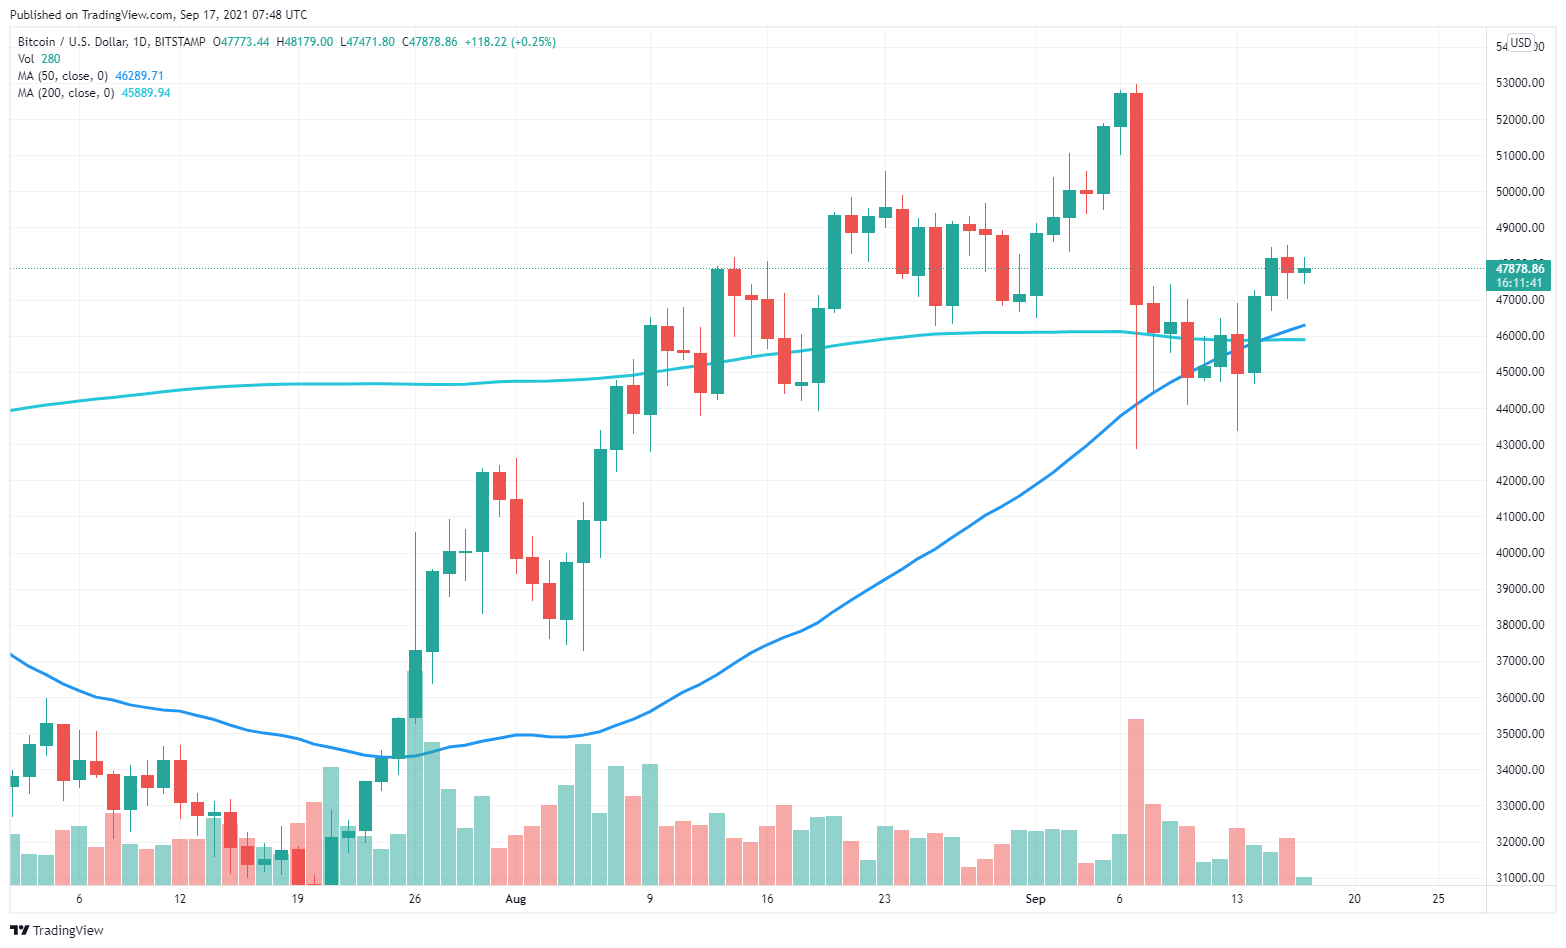 Bitcoin price chart showing the 50-day moving average crossing above the 200-day moving average